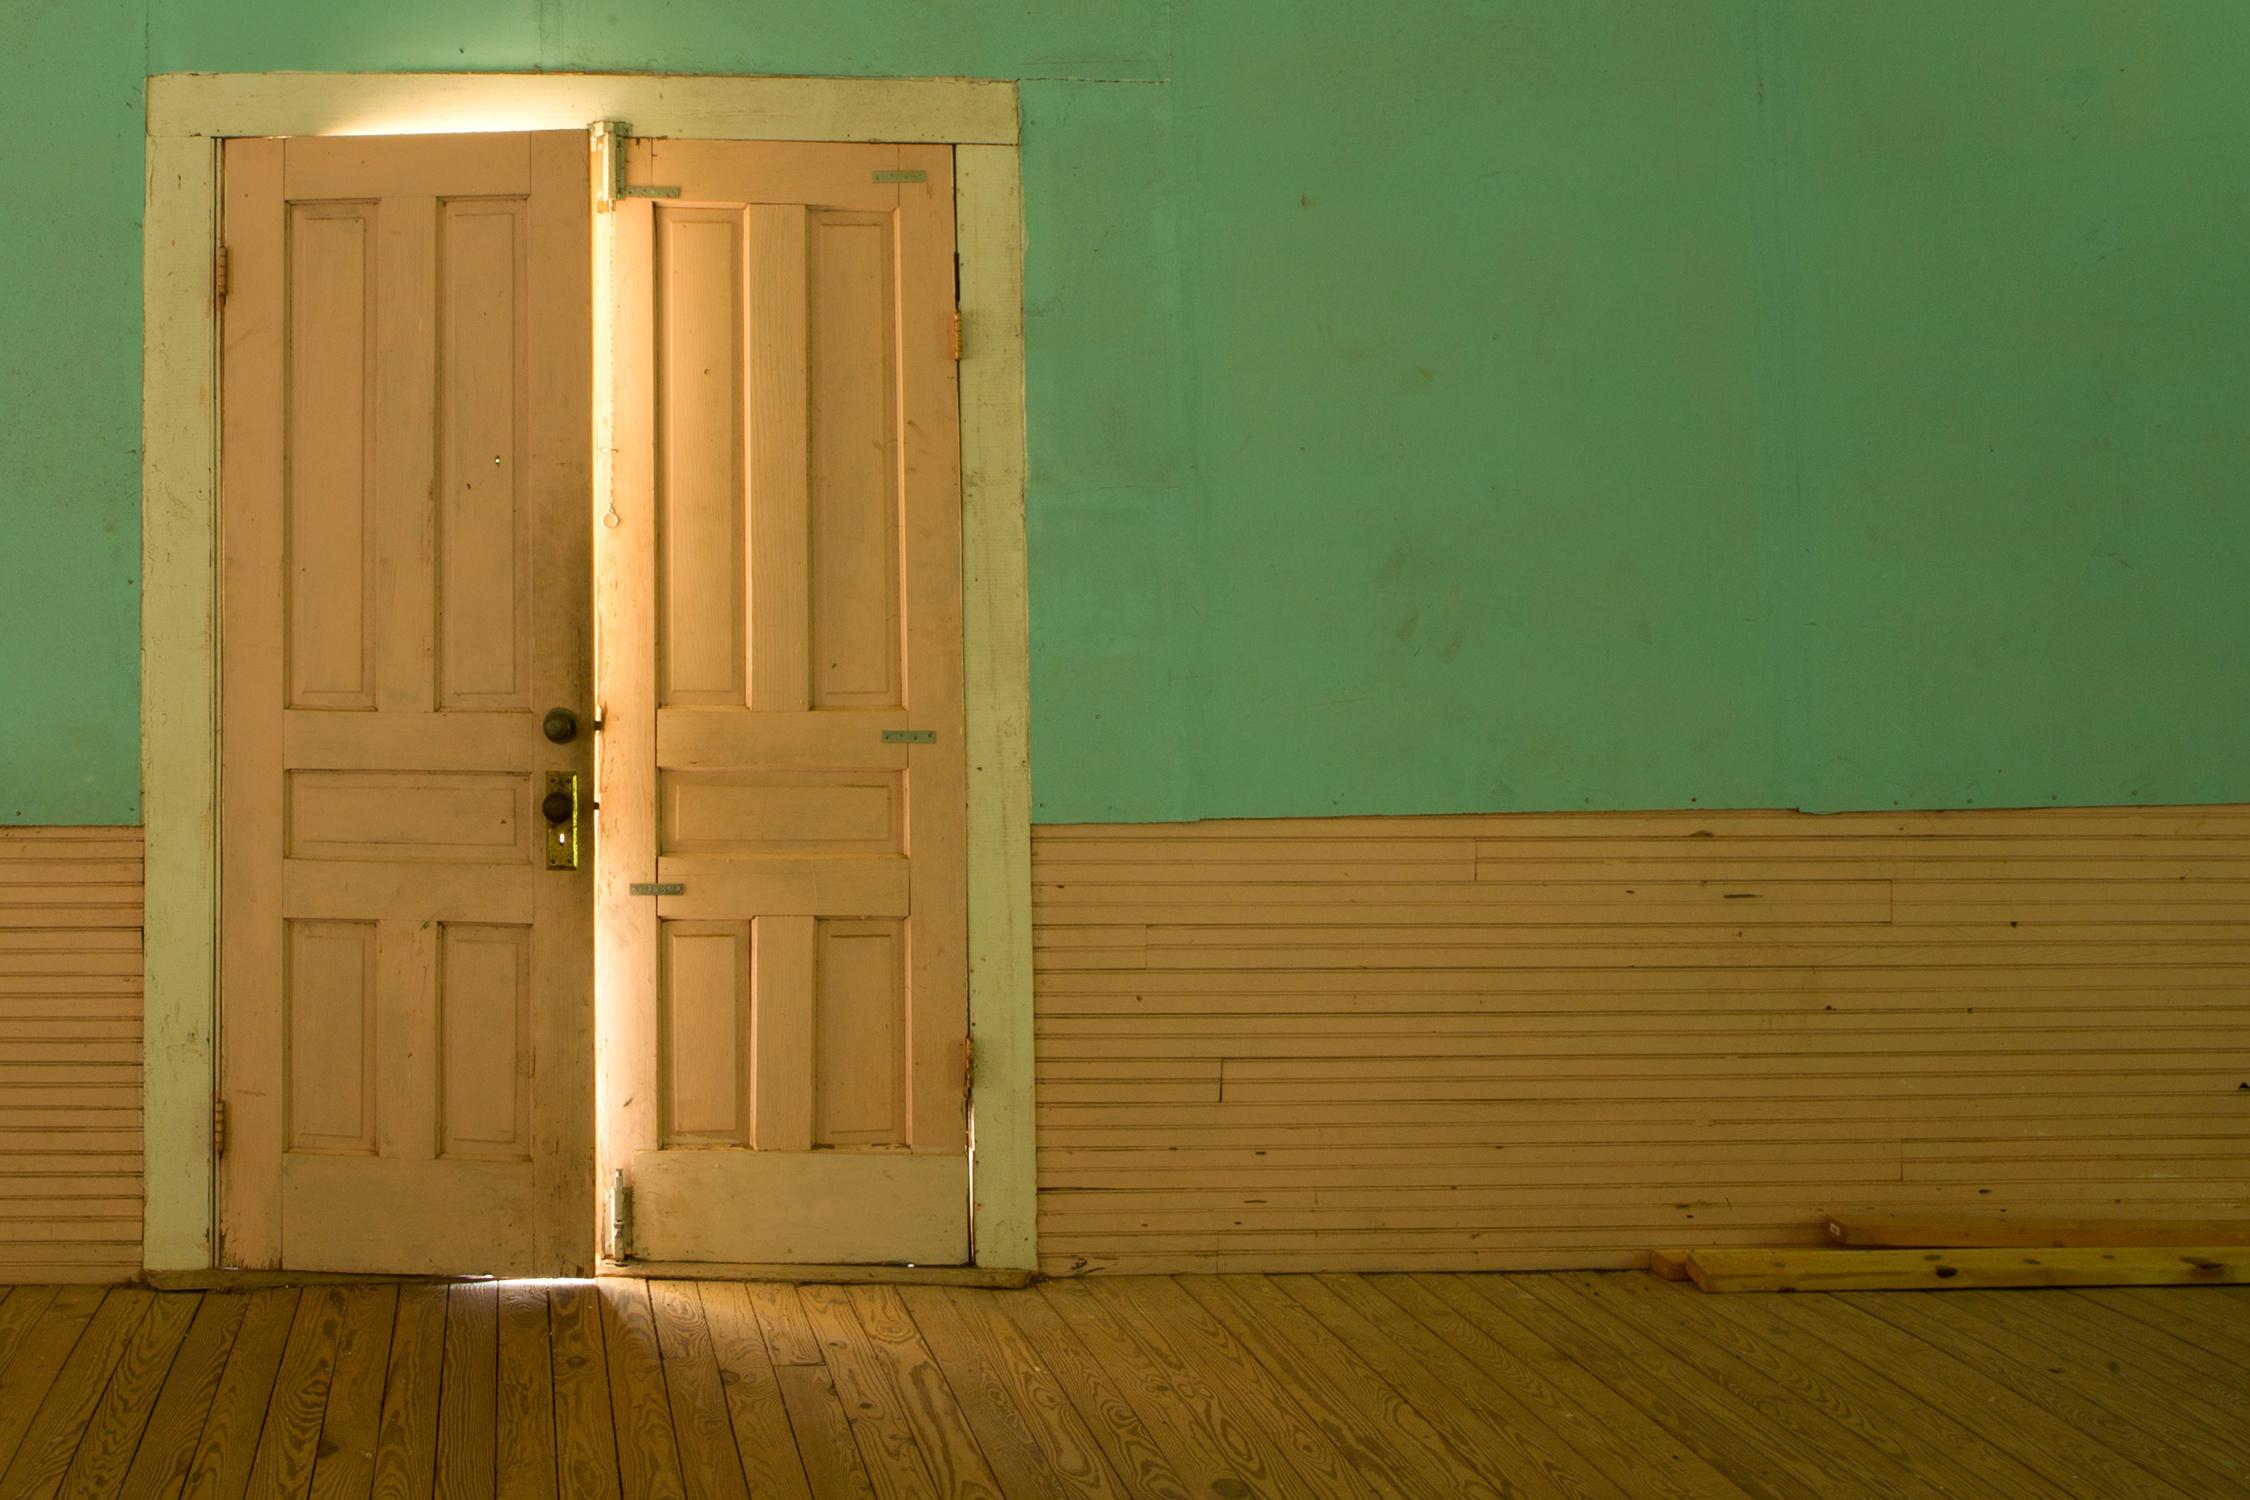 Rebecca Skinner’s “Anticipation” is a 12 x 18 inch color photograph of doors in the interior of an abandoned church found in rural Georgia. A door is slightly ajar offering a glimpse of light into the peach and green painted room. The frameless